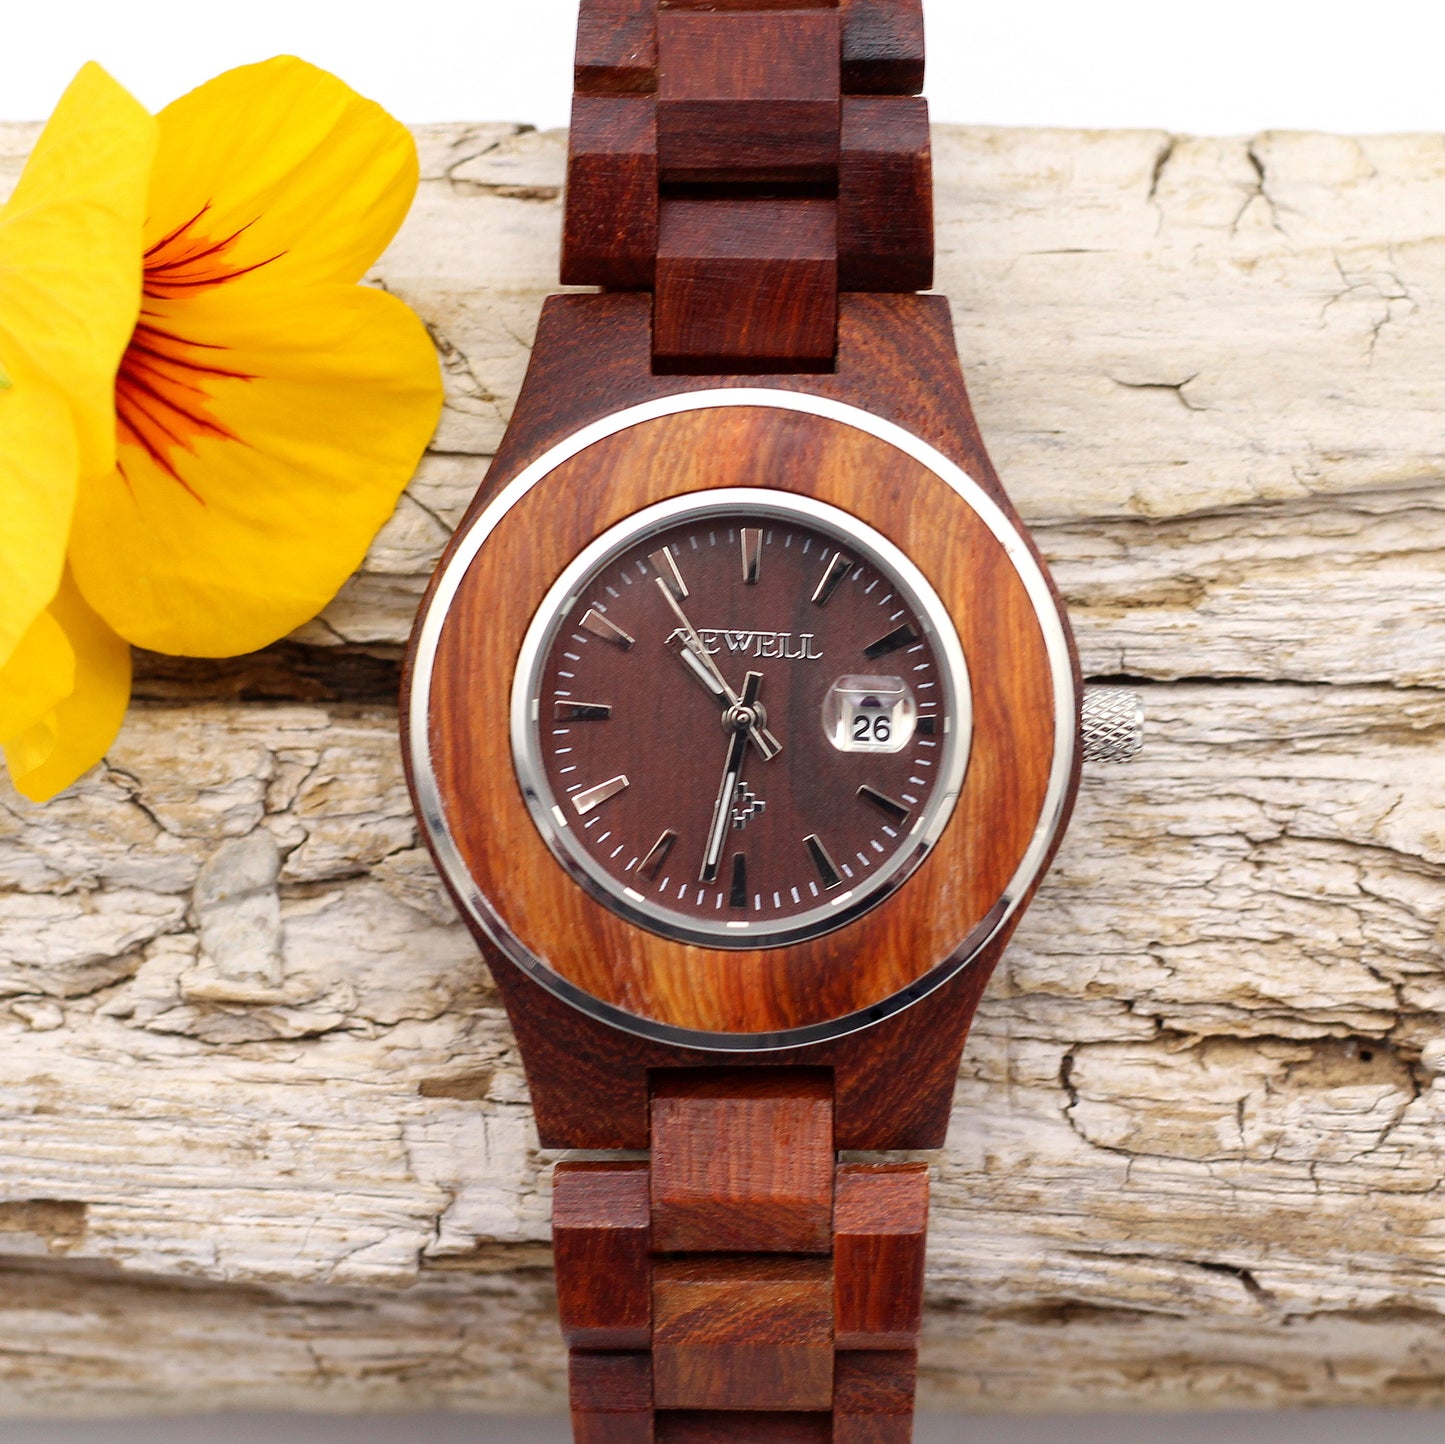 BAMTIQUE MISSDATE Ladies Wooden Watch Date Function - Hashtag Bamboo